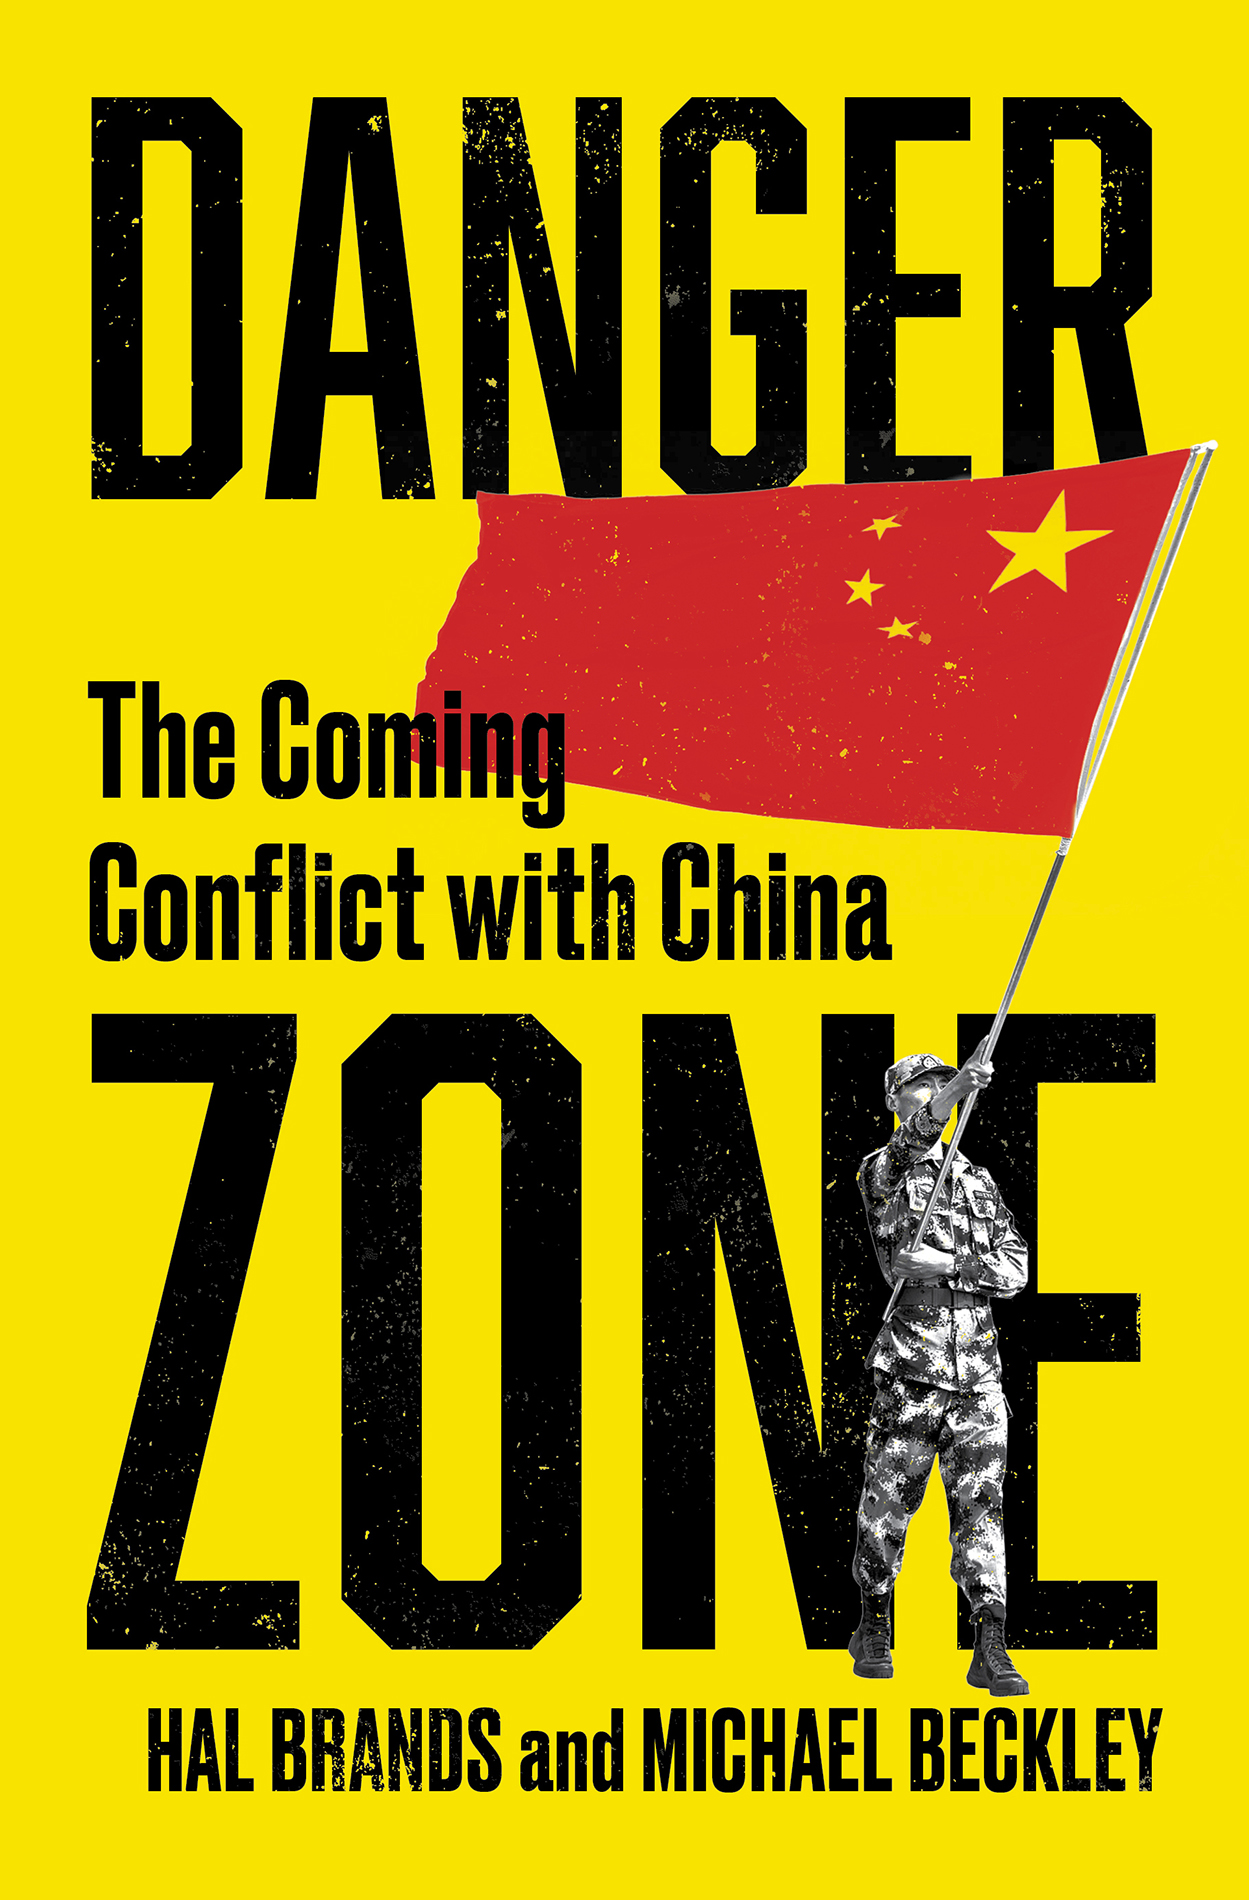 DANGER ZONE The Coming Conflict with China HAL BRANDS and MICHAEL BECKLEY - photo 1